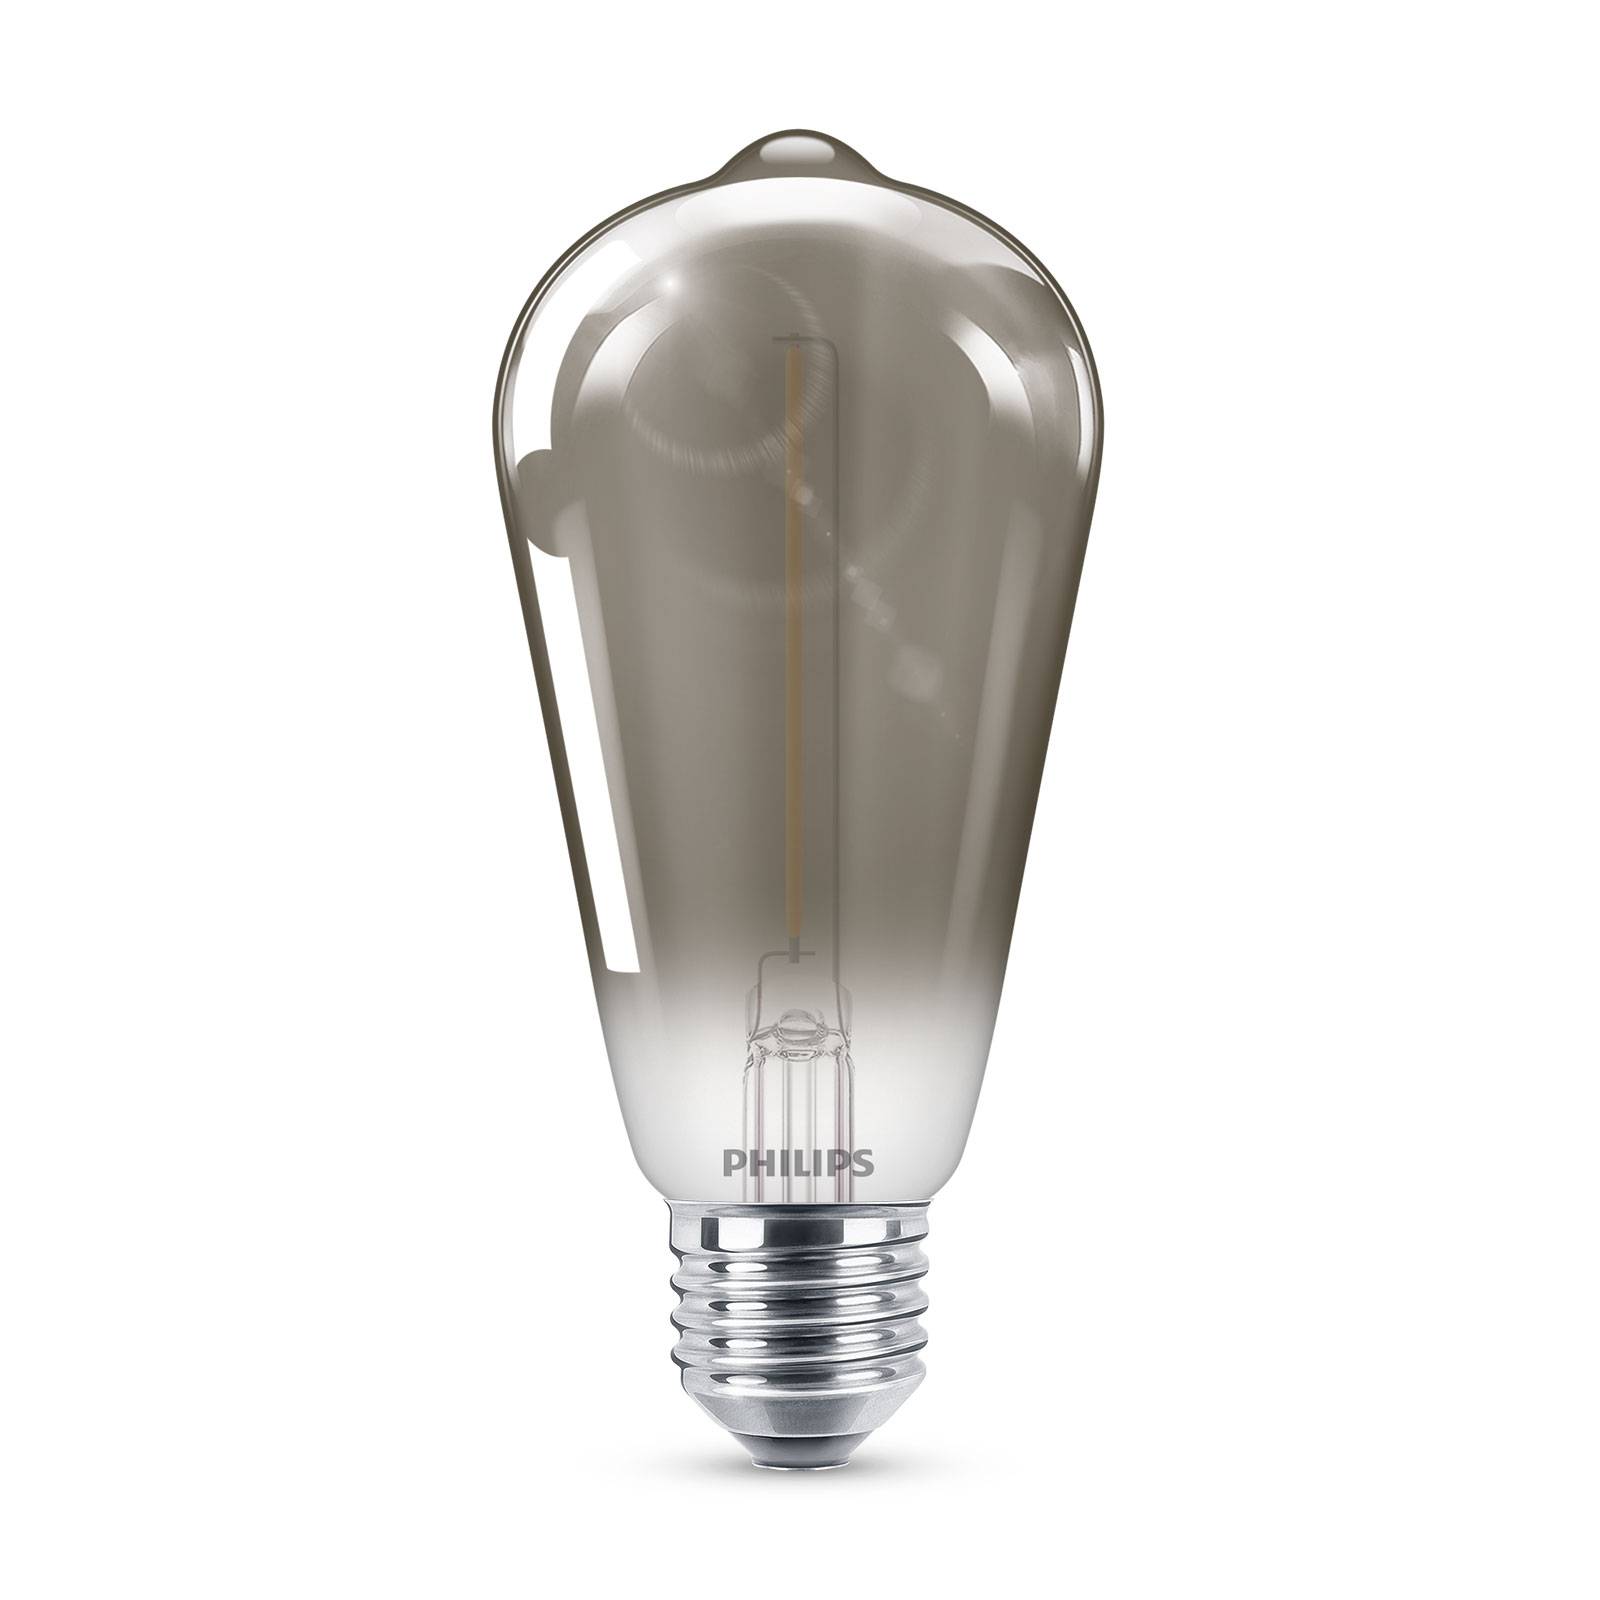 Philips Classic LED-Lampe smoky E27 ST64 2,3W von Philips